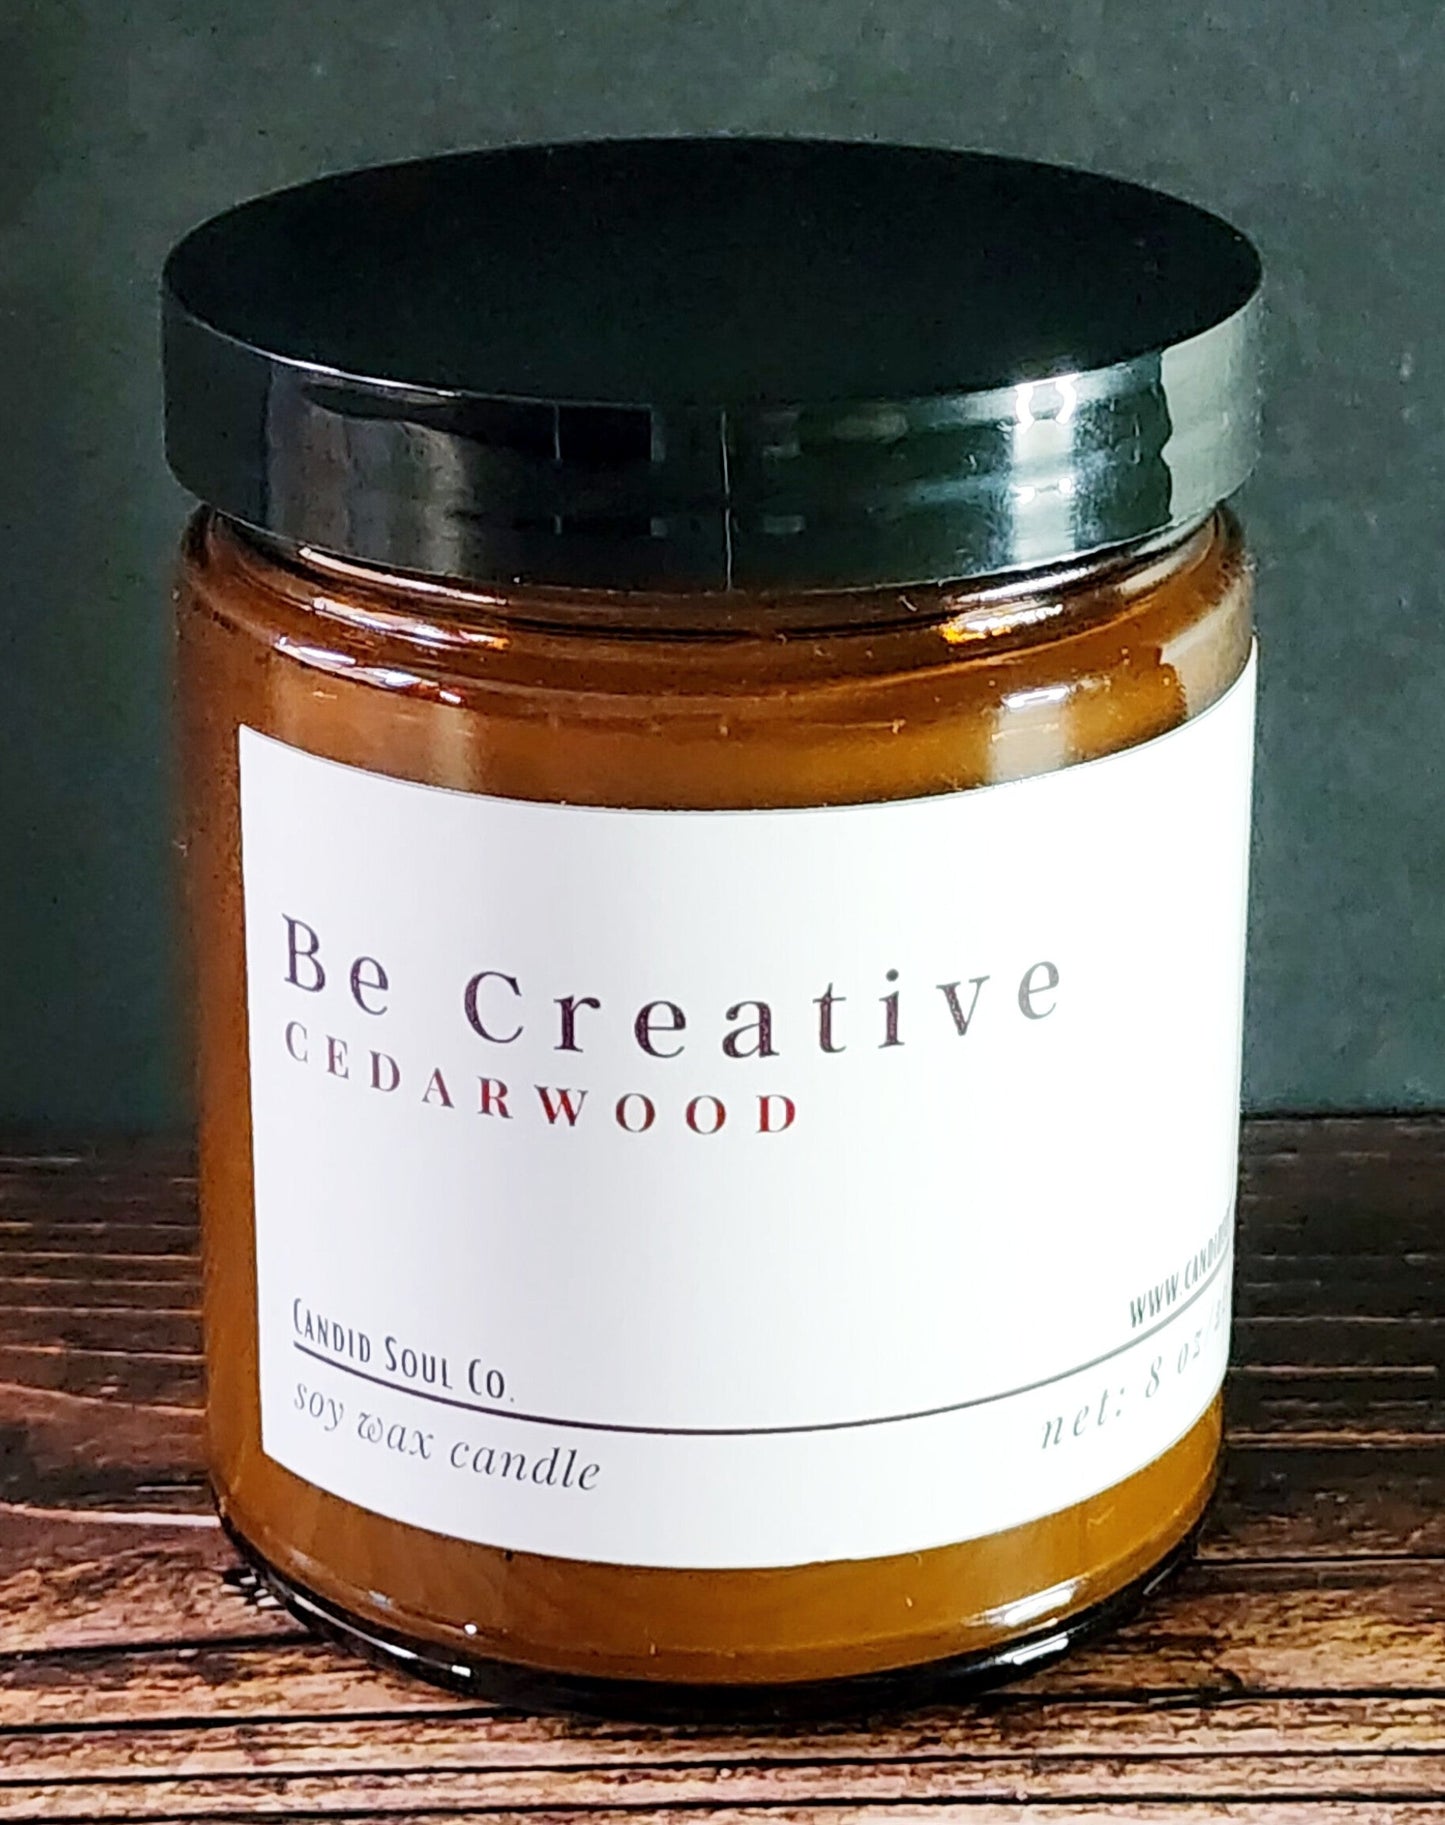 Be Creative: Scented Soy Wax Affirmation Candle